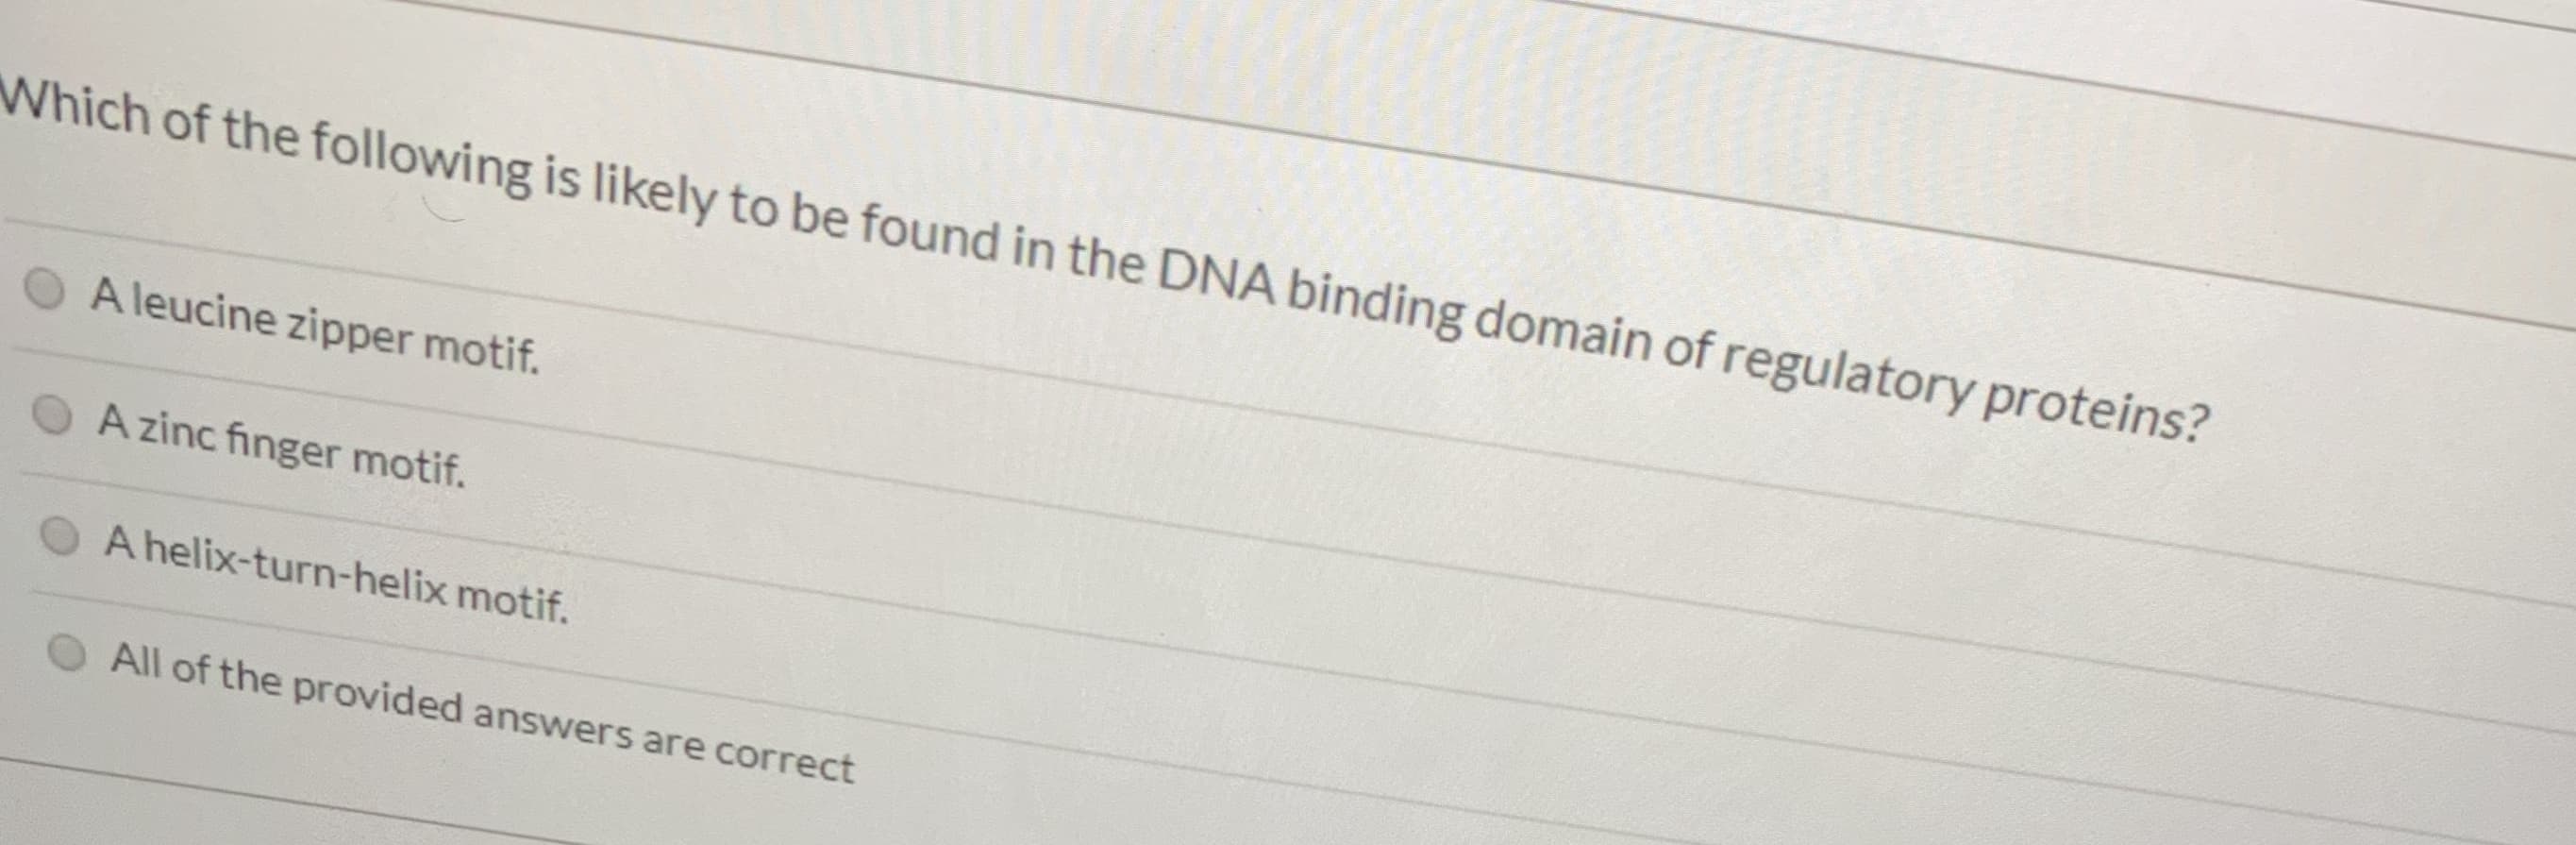 Which of the following is likely to be found in the DNA binding domain of regulatory proteins?
A leucine zipper motif.
A zinc finger motif.
A helix-turn-helix motif.
All of the provided answers are correct
